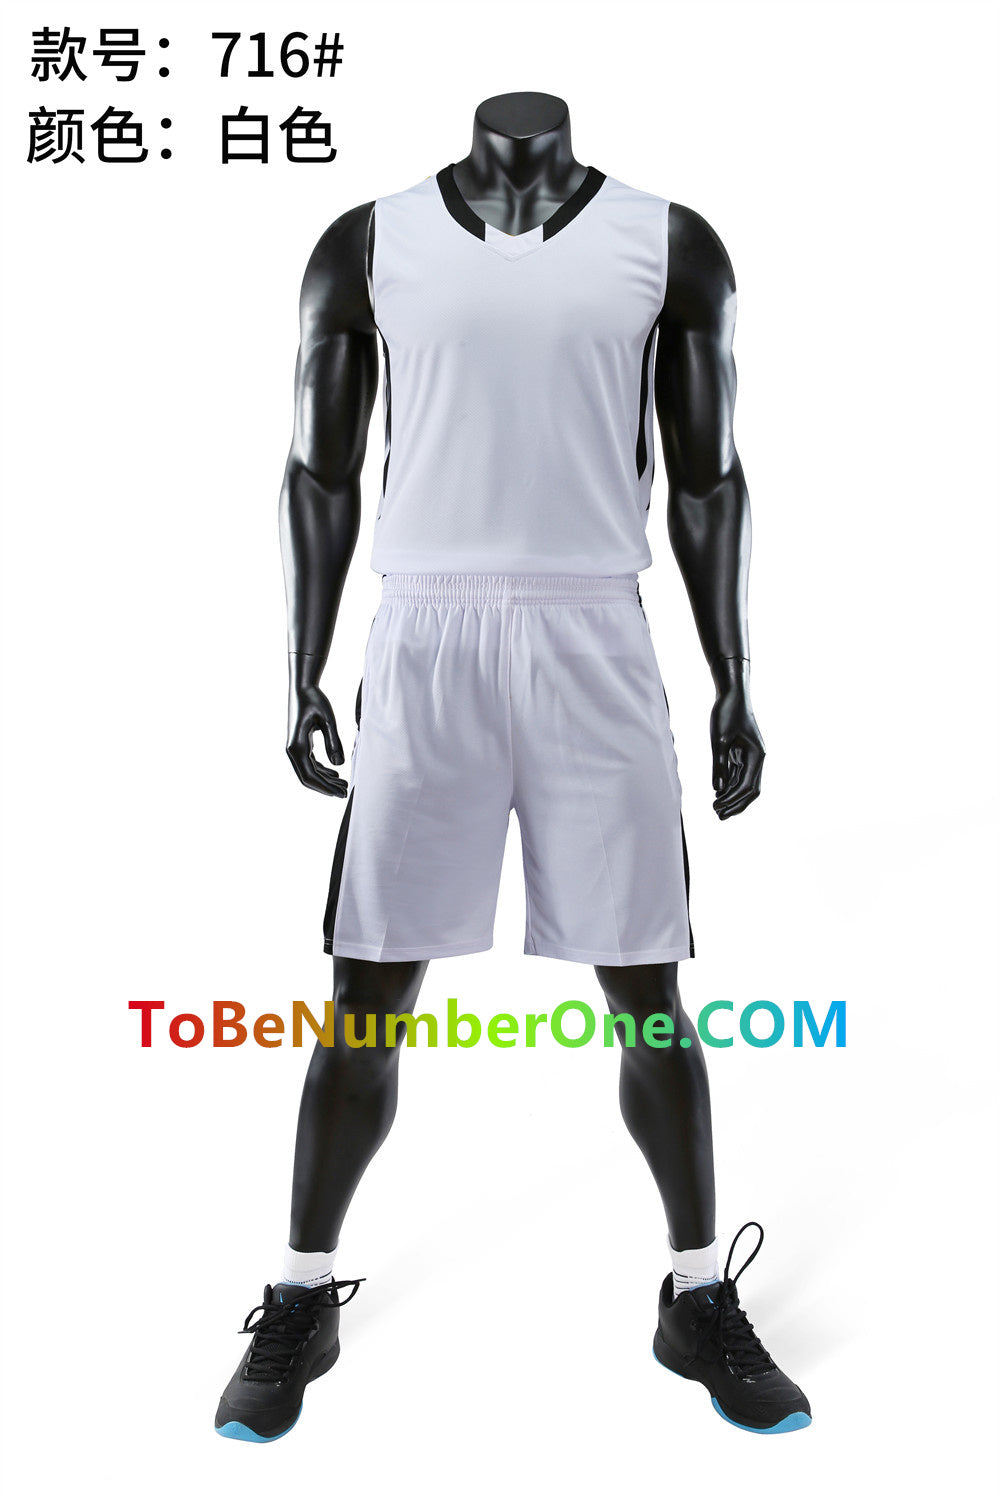 Customize instock High Quality Quick-drying basketball uniforms print with team name , player and number.  jerseys&shorts with pocket 716#